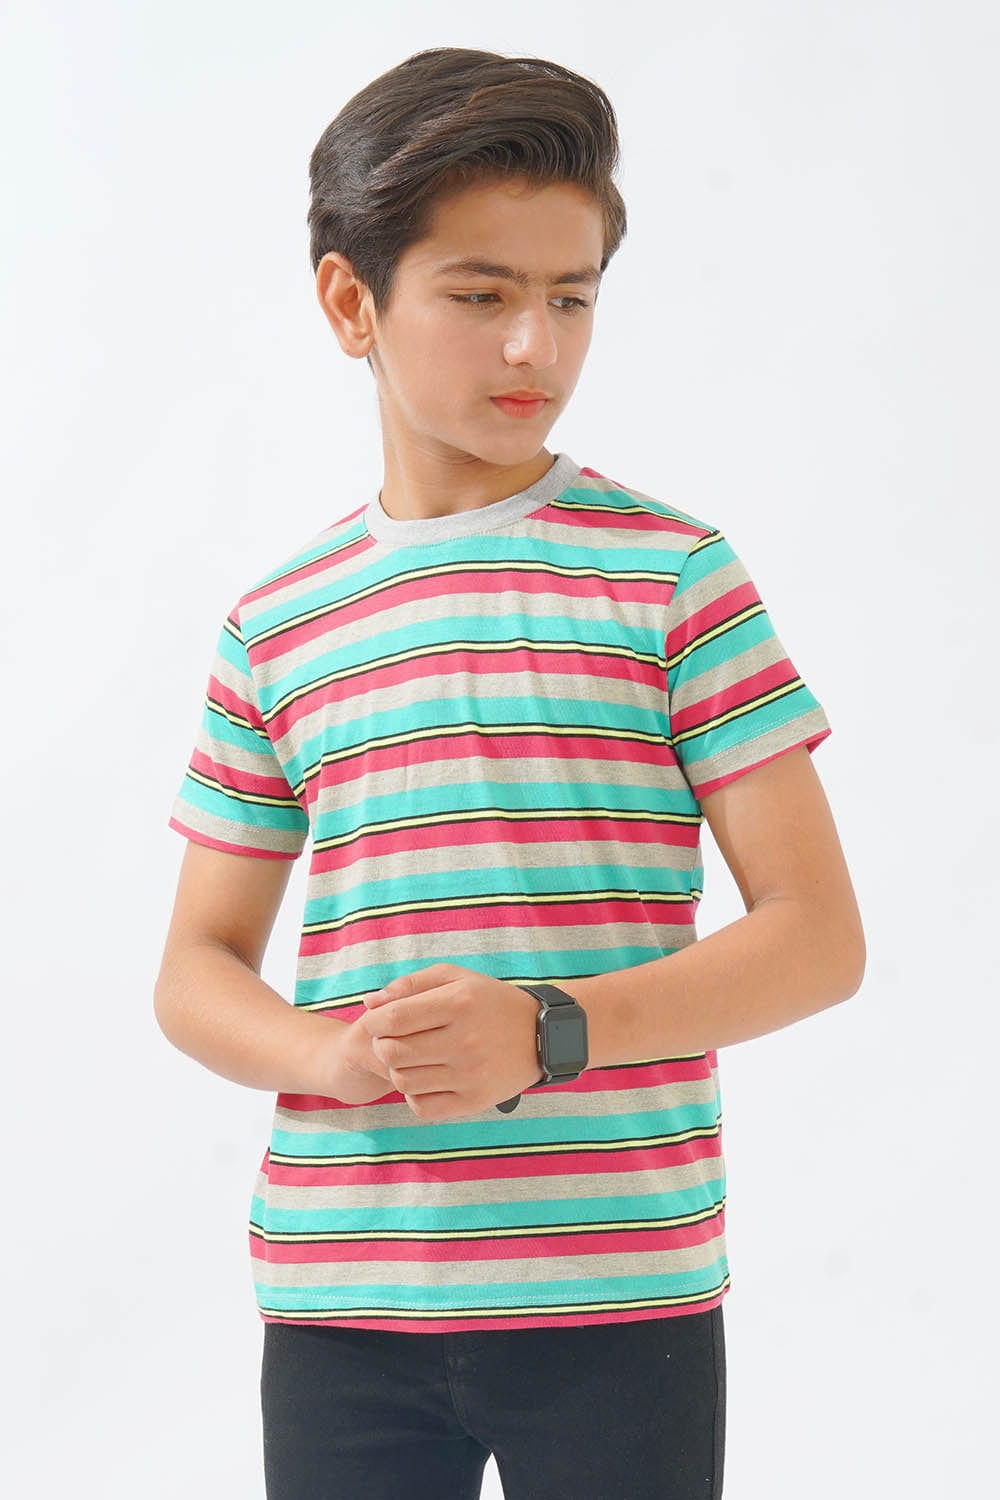 Hope Not Out by Shahid Afridi Boys Knit T-Shirt Multi Color Striped Tee